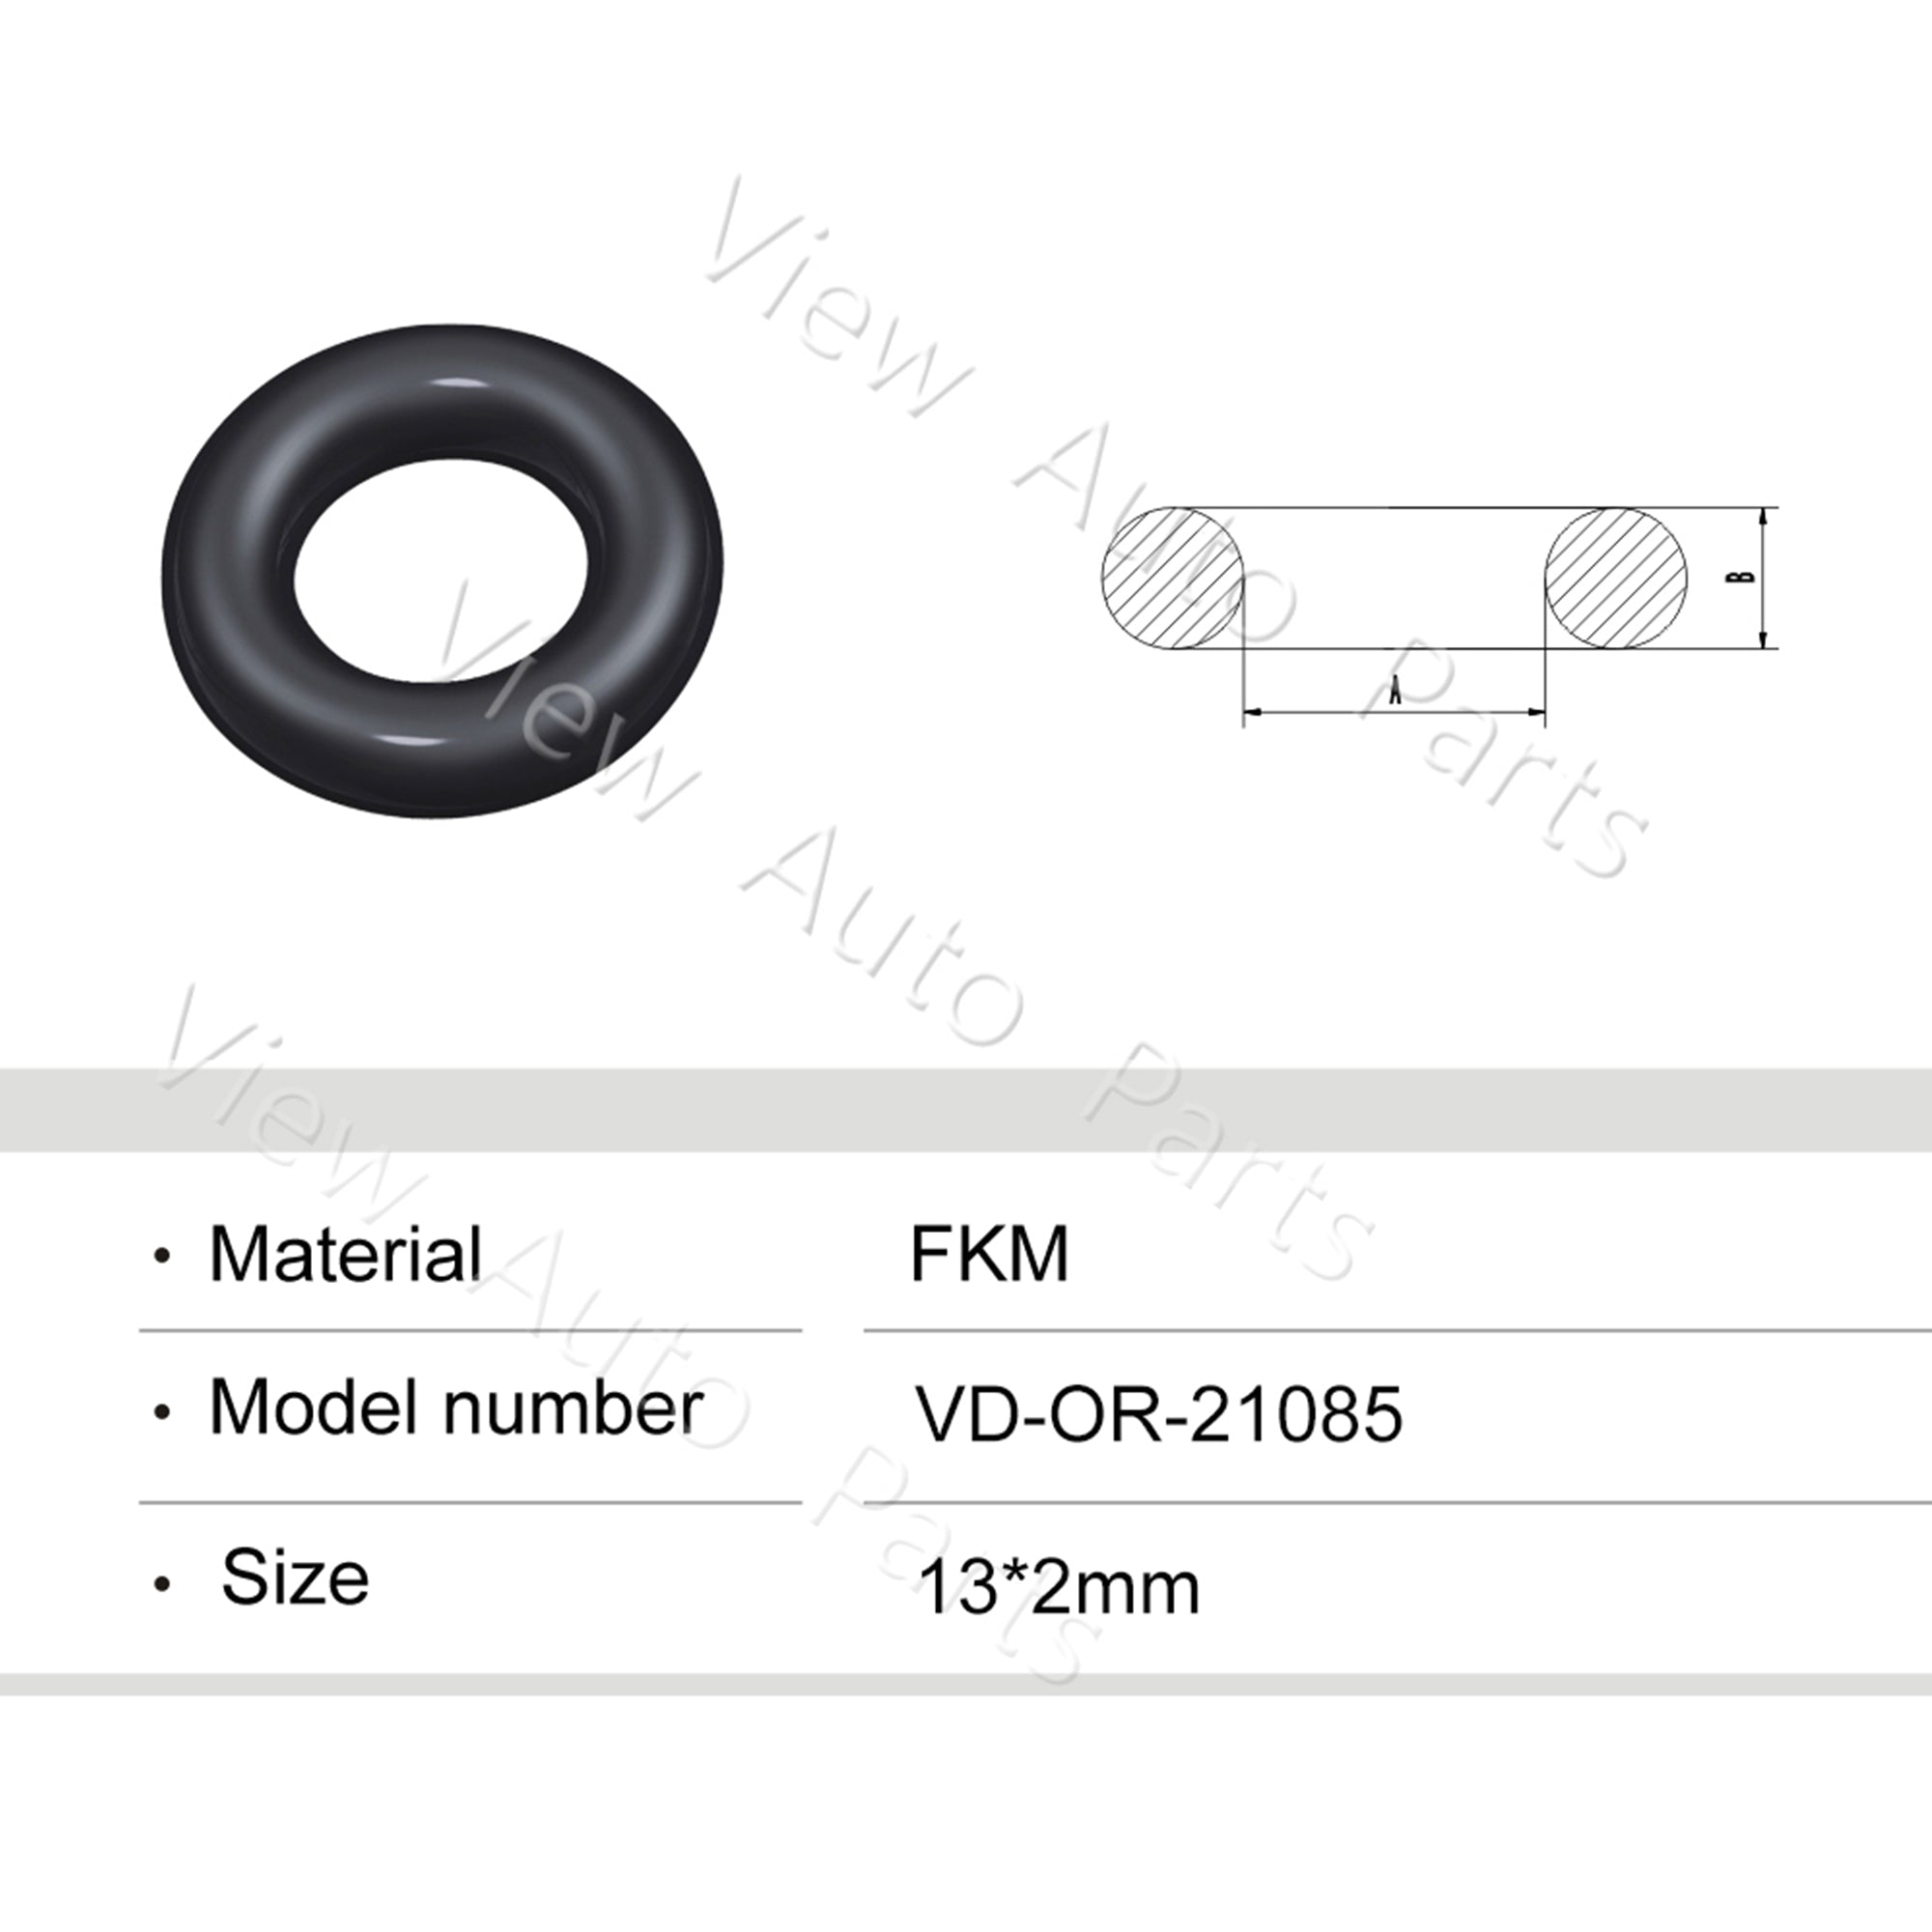 Fuel Injector Rubber Seal Orings for Fuel Injector Repair Kits FKM & Rubber Heat Resistant, Size: 13*2mm OR-21085